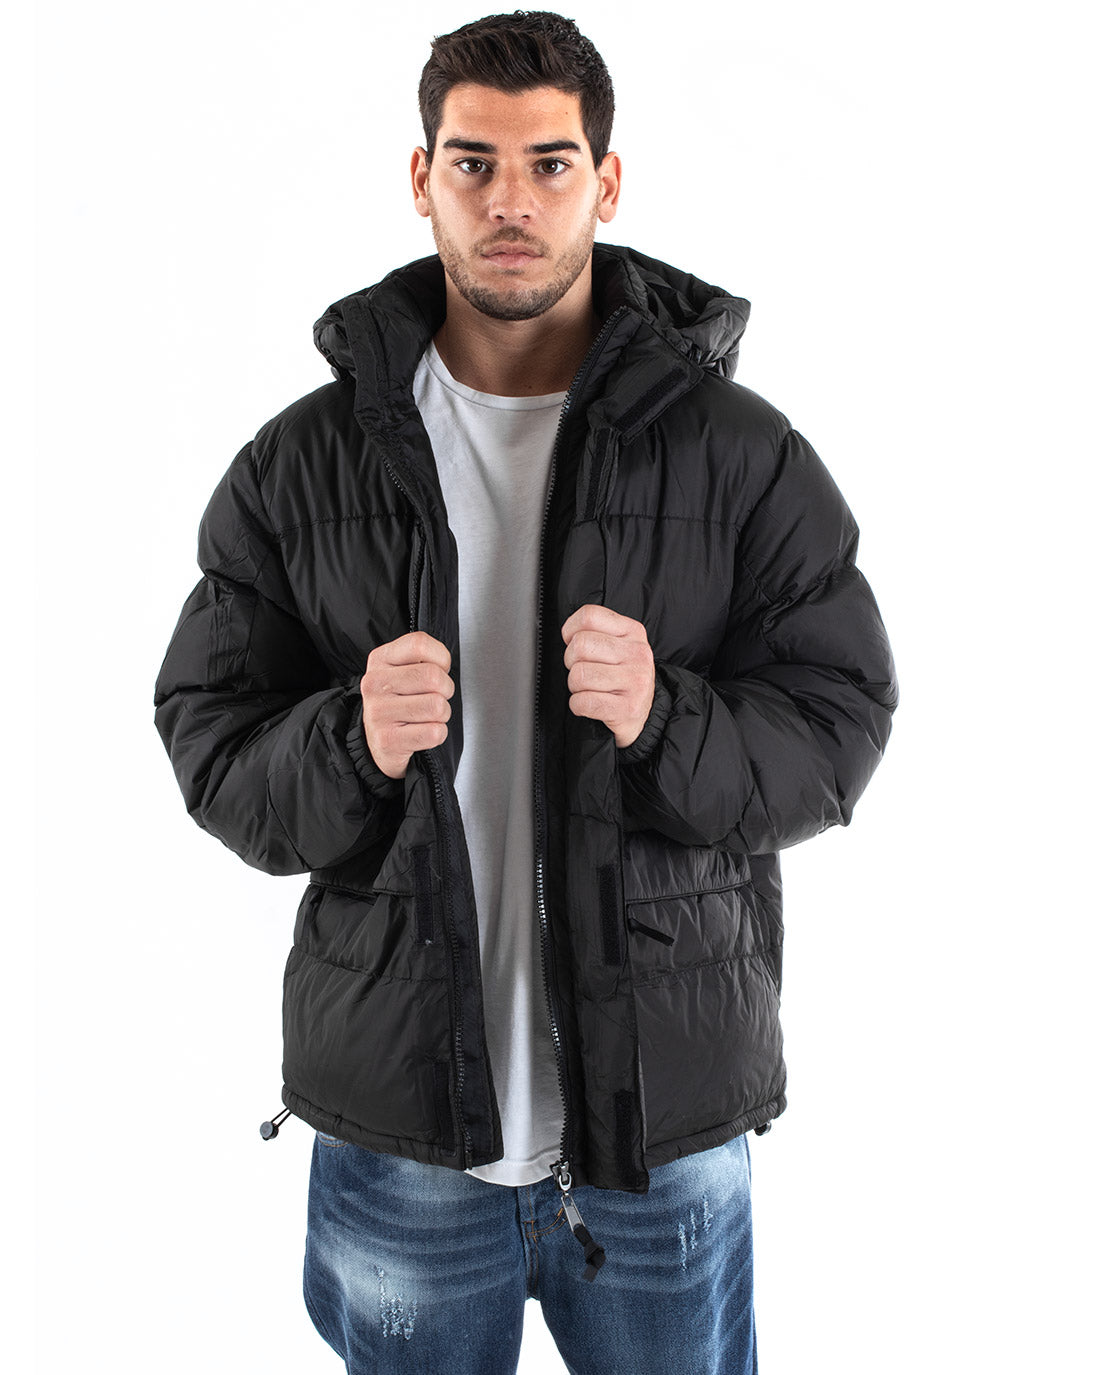 Men's Bomber Jacket Solid Color Black Casual Padded Hood GIOSAL-G2937A